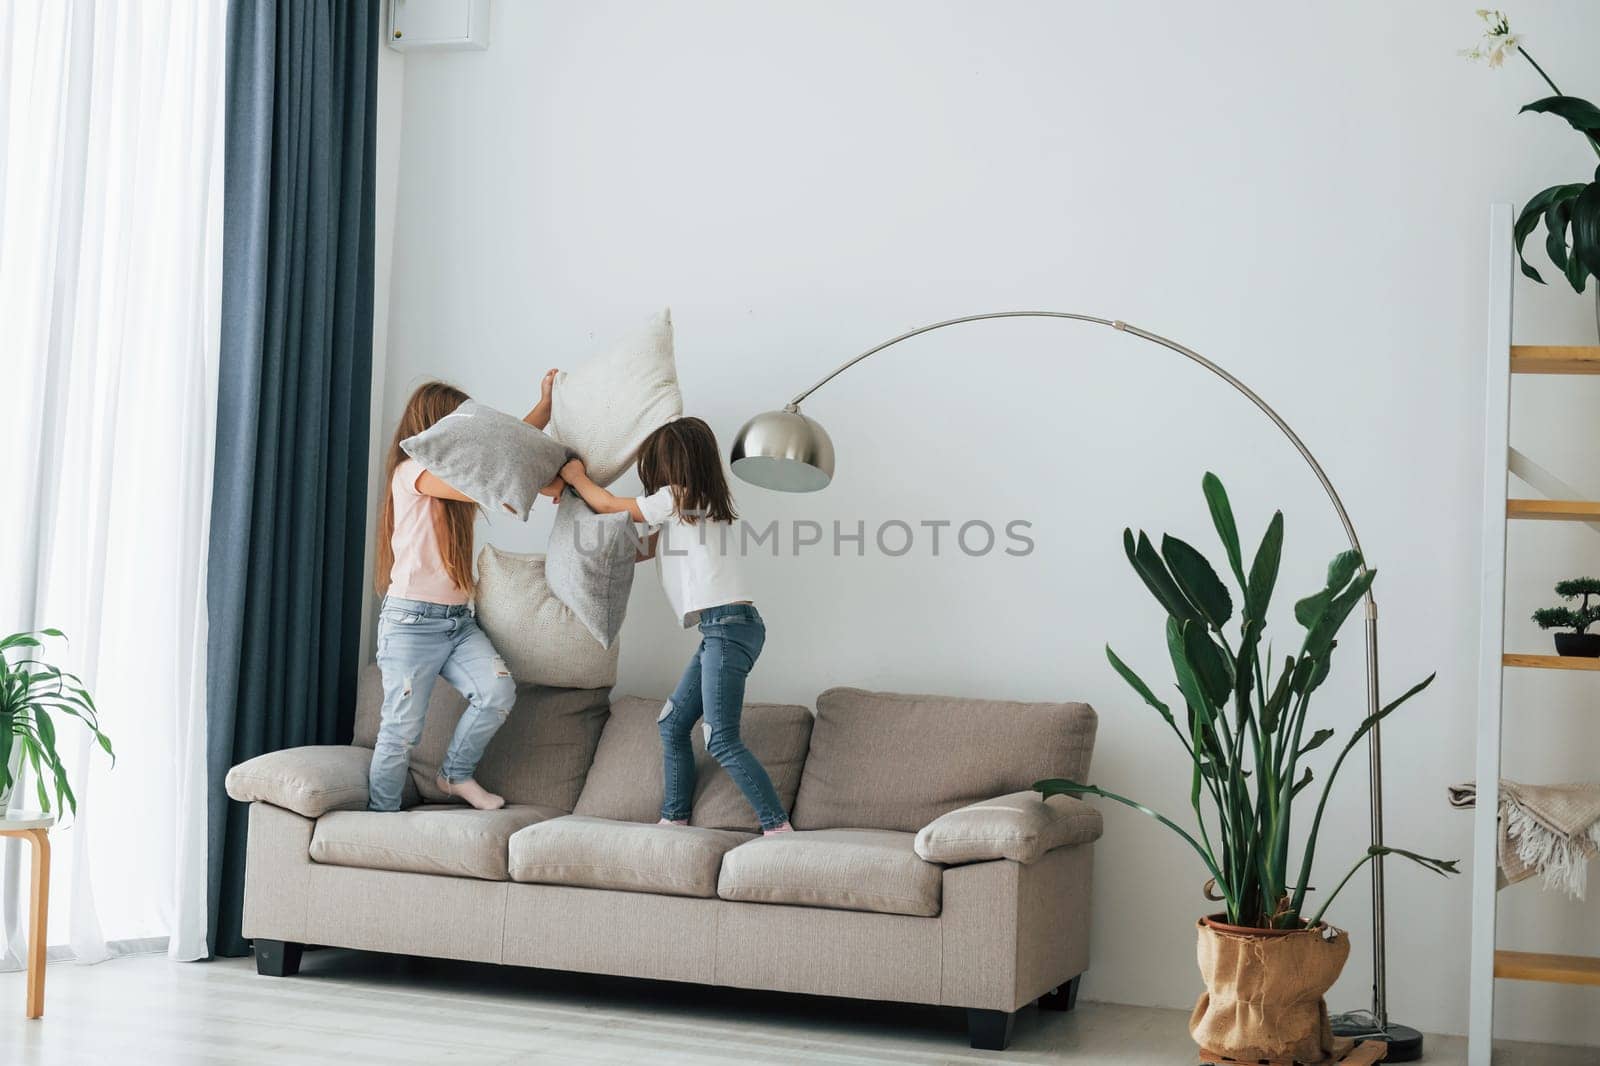 Running with pillows. Kids having fun in the domestic room at daytime together by Standret